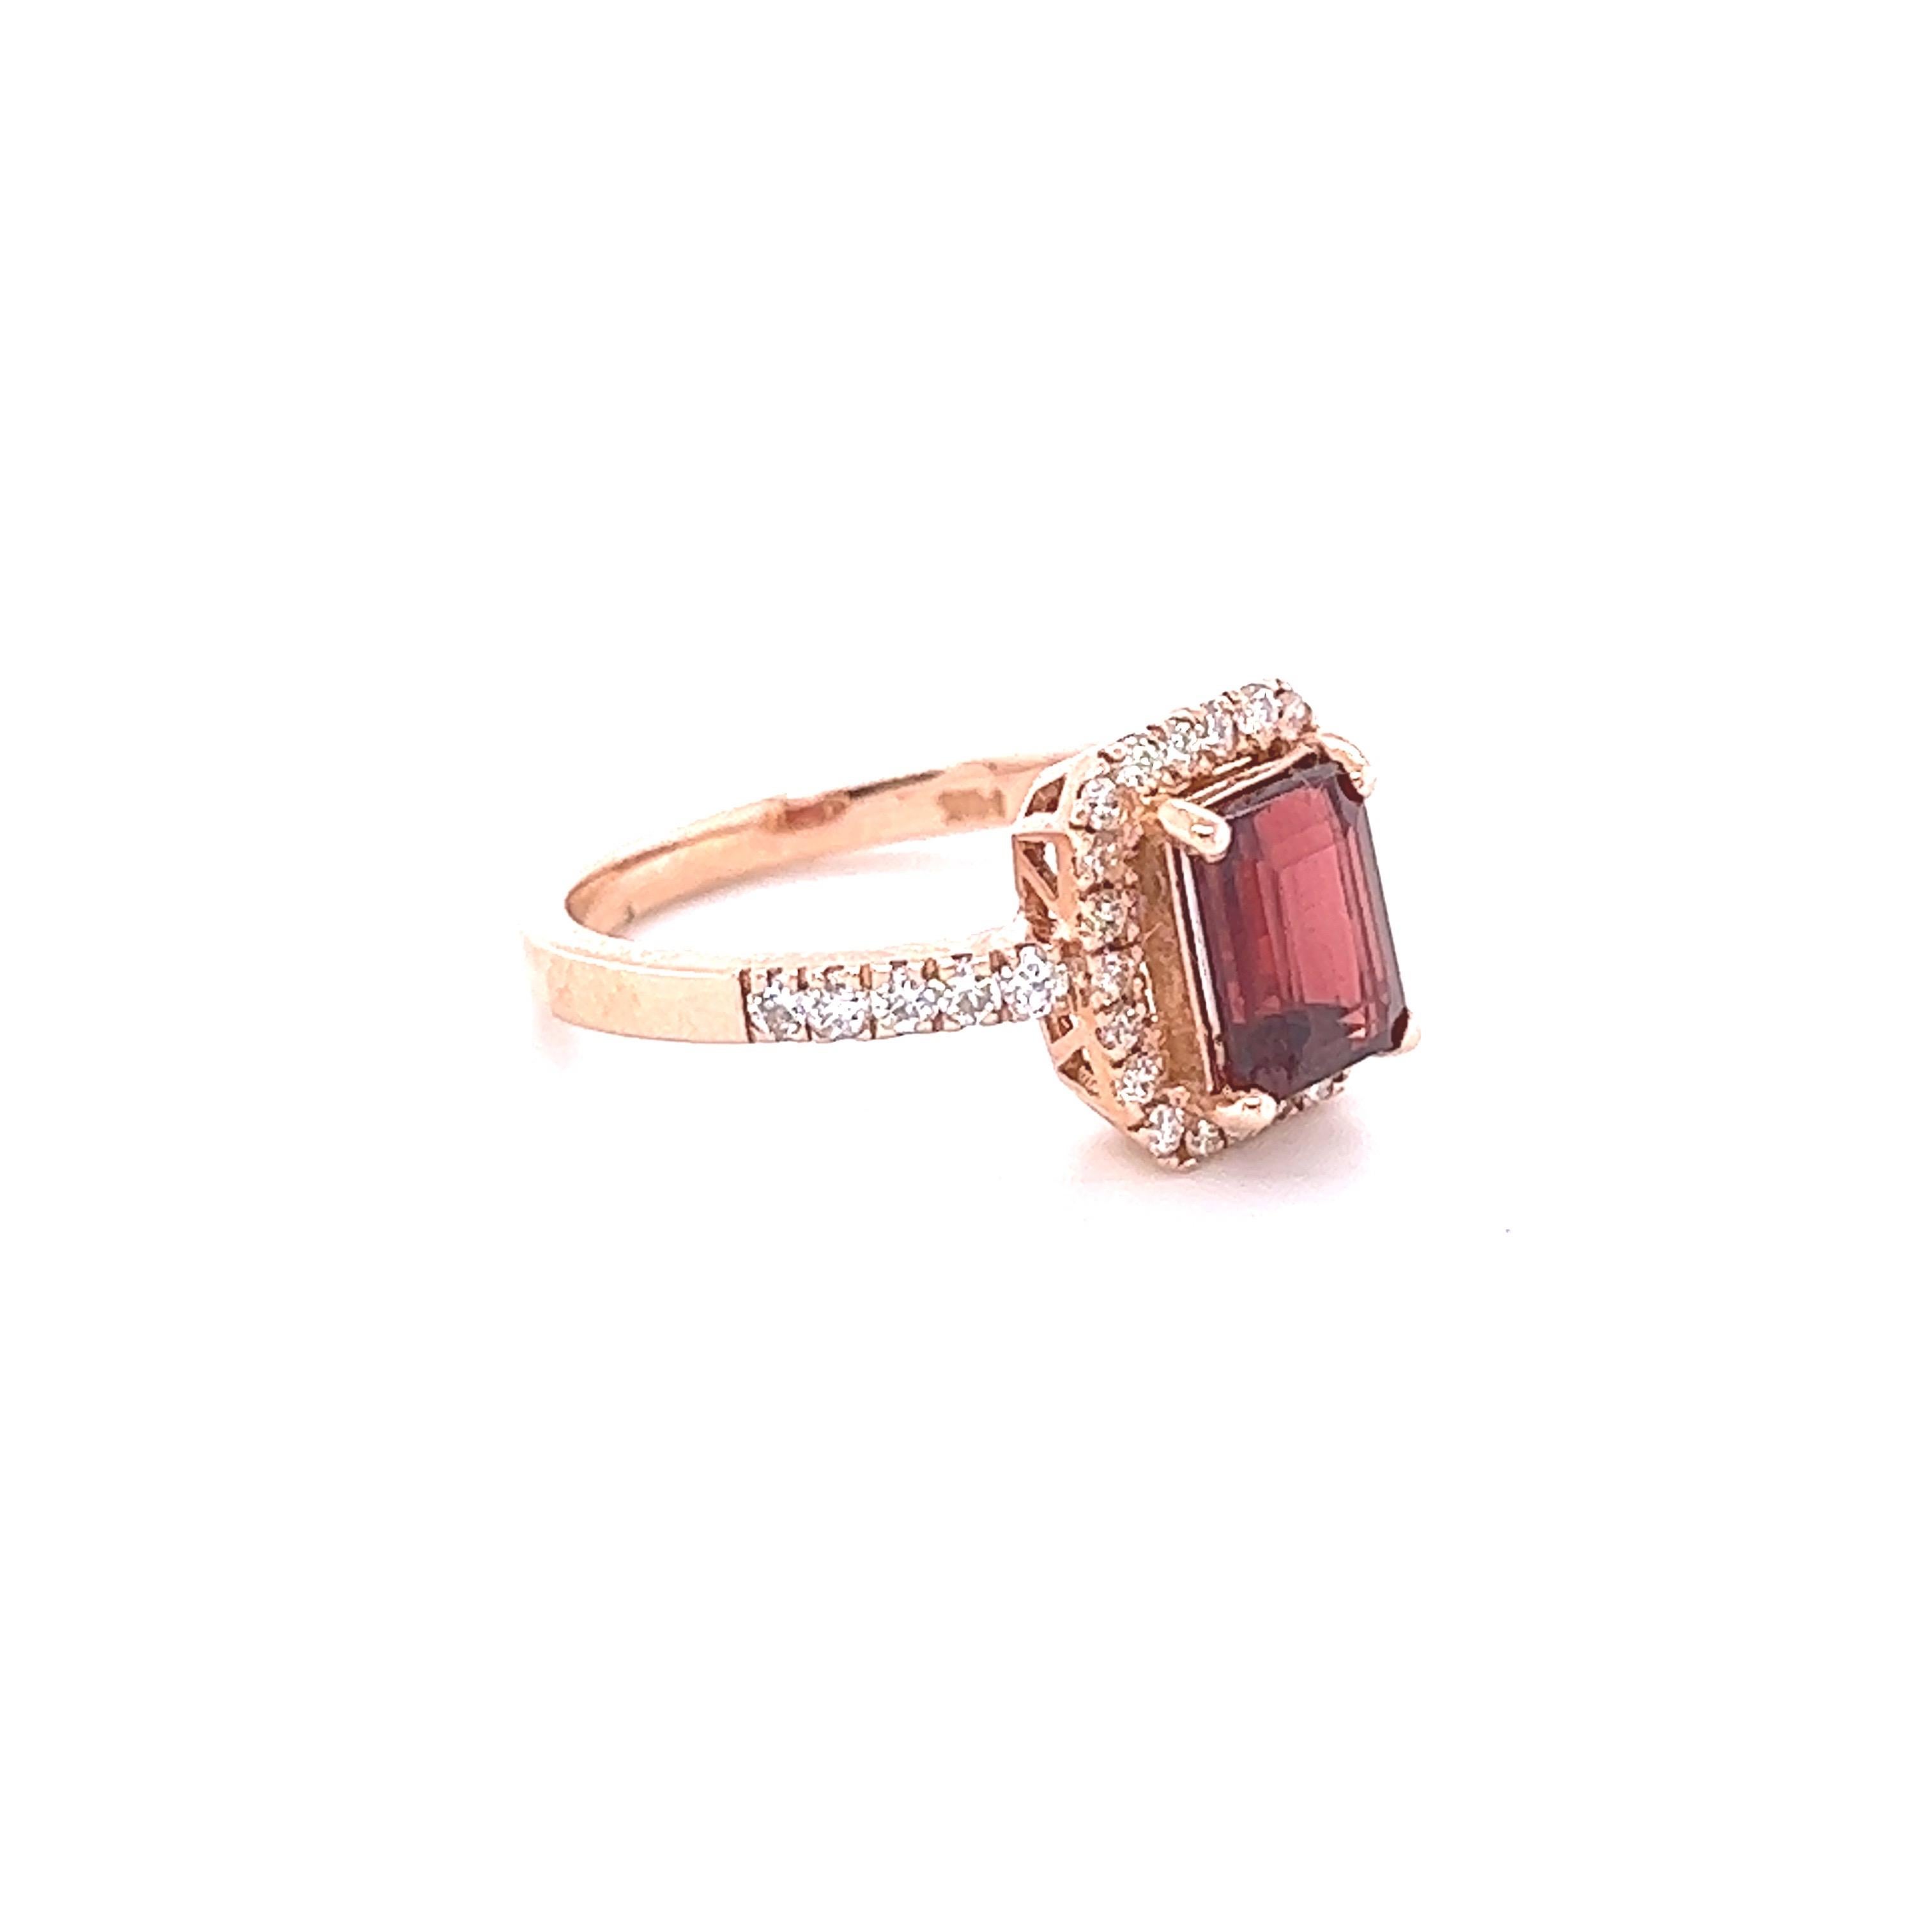 This ring has a Emerald Cut Red Tourmaline that weighs 2.02 Carats and has 32 Round Cut Diamonds that weigh 0.46 carats. The clarity and color of the diamonds are VS-H.
The total carat weight of the ring is 2.48 Carats. 
The Emerald Cut Tourmaline